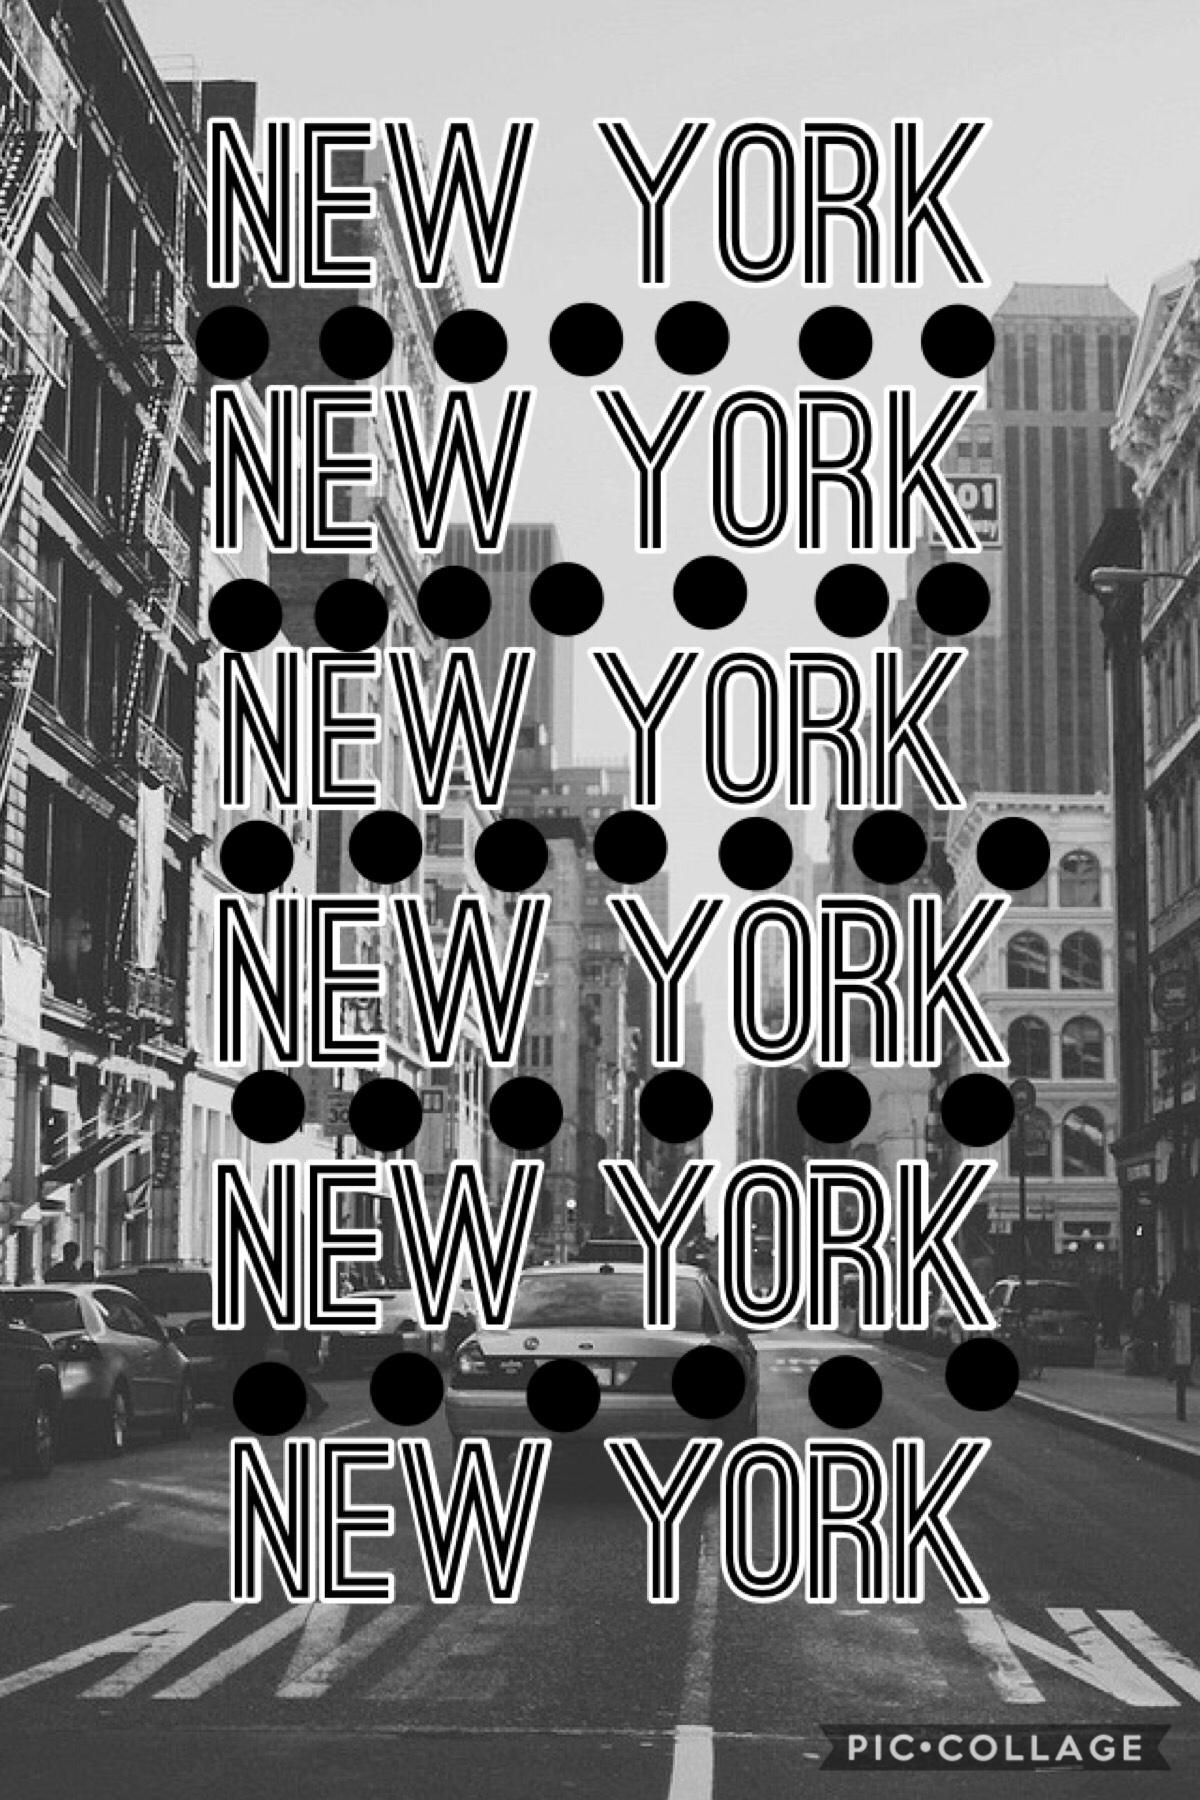 Hey guys! Hope everyone is doing good! I am actually in New York right now and thought I should do a collage about New York! So here it is! Hope y’all like it!❤️